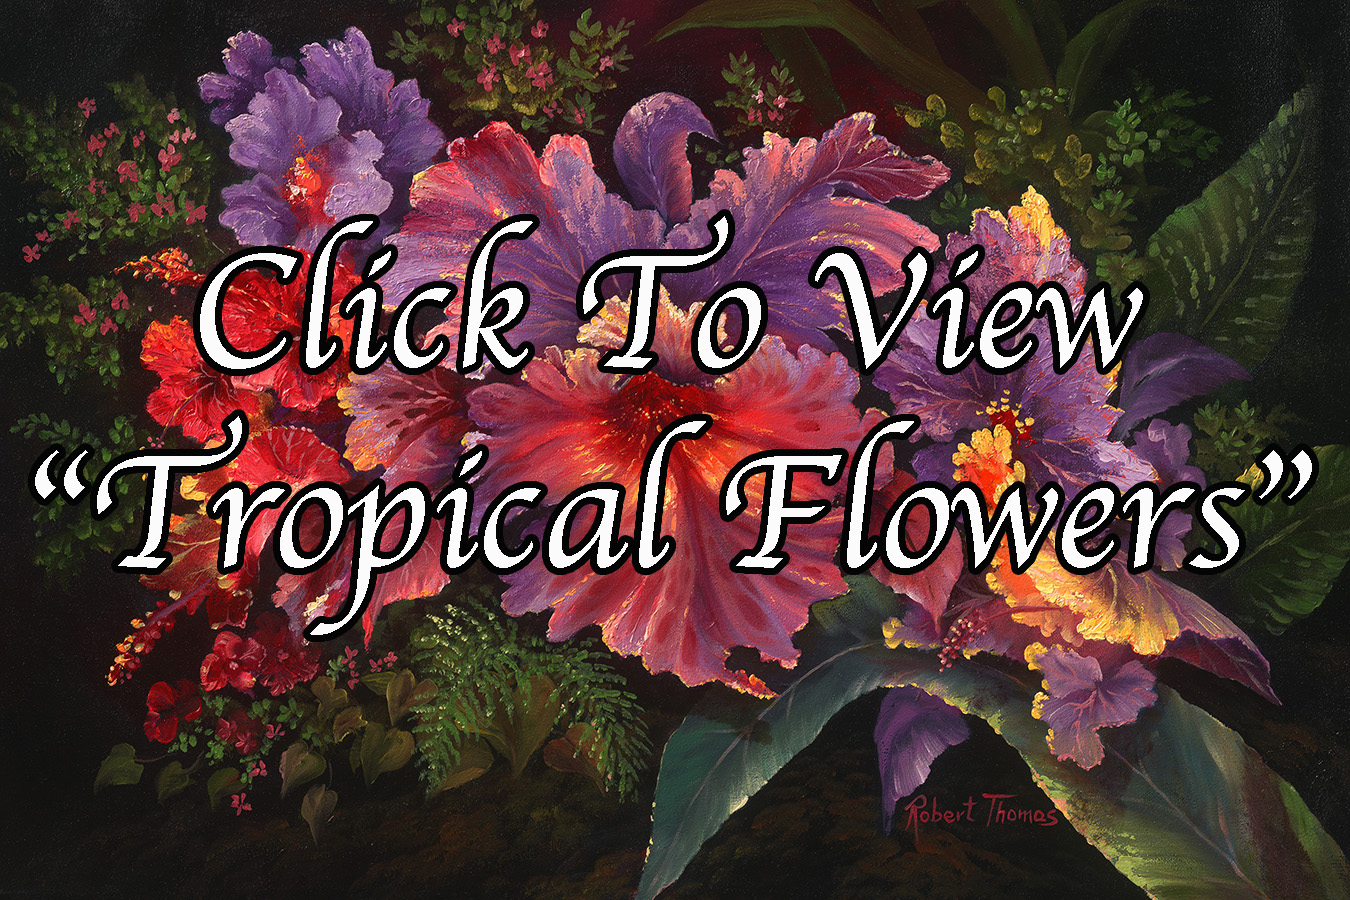 "Tropical Flowers"